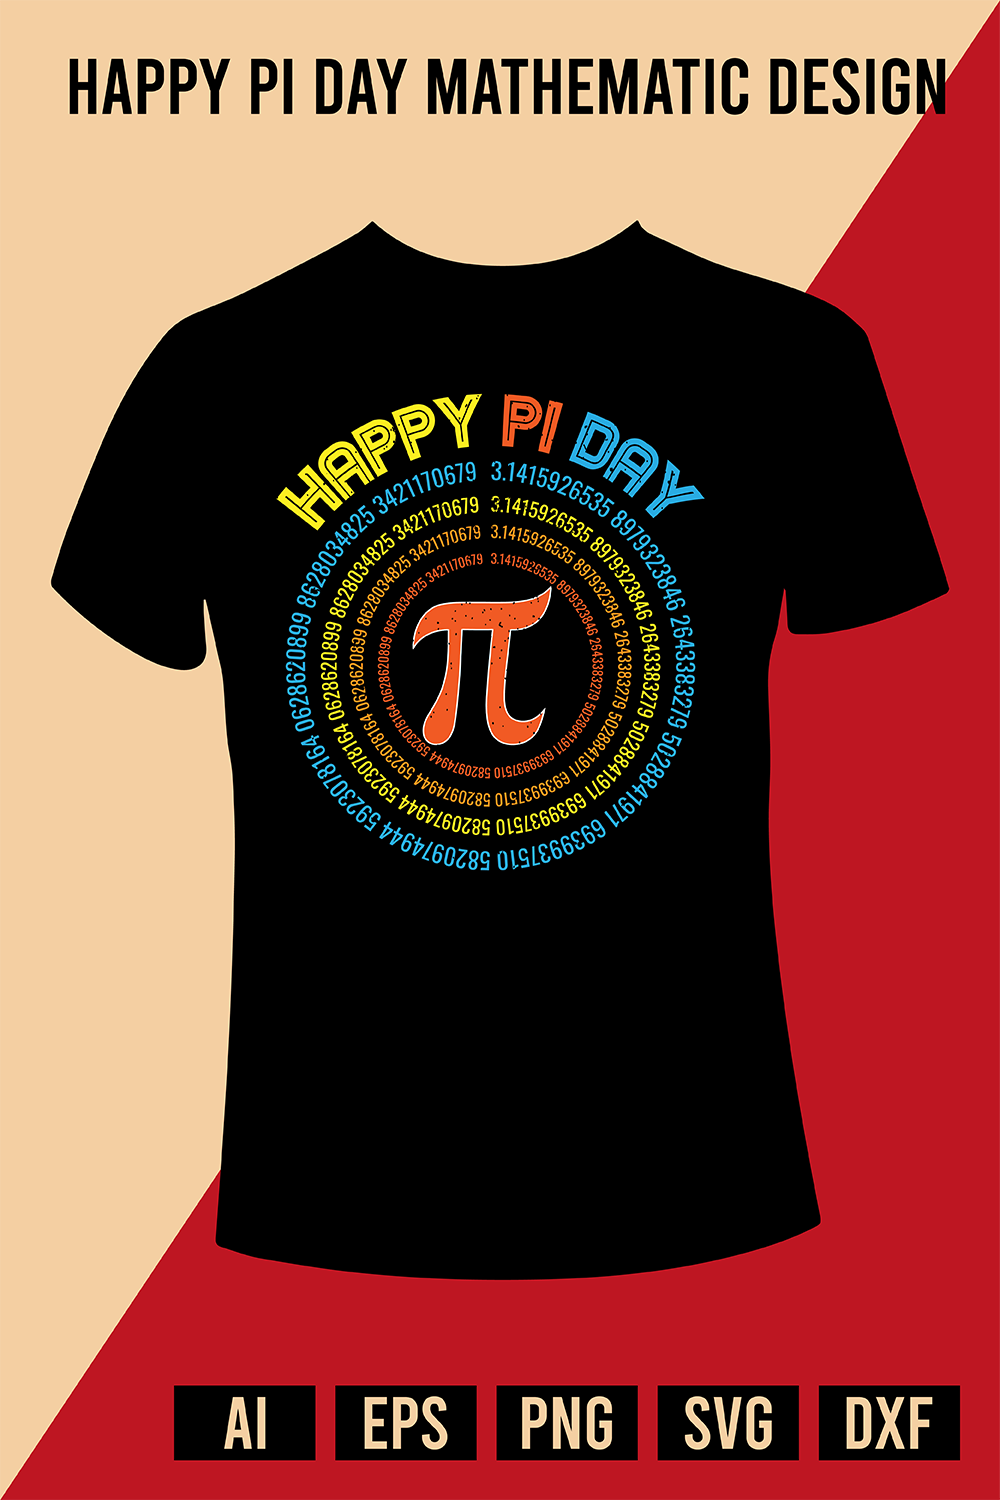 Happy Pi Day Mathematic T-Shirt Design pinterest preview image.